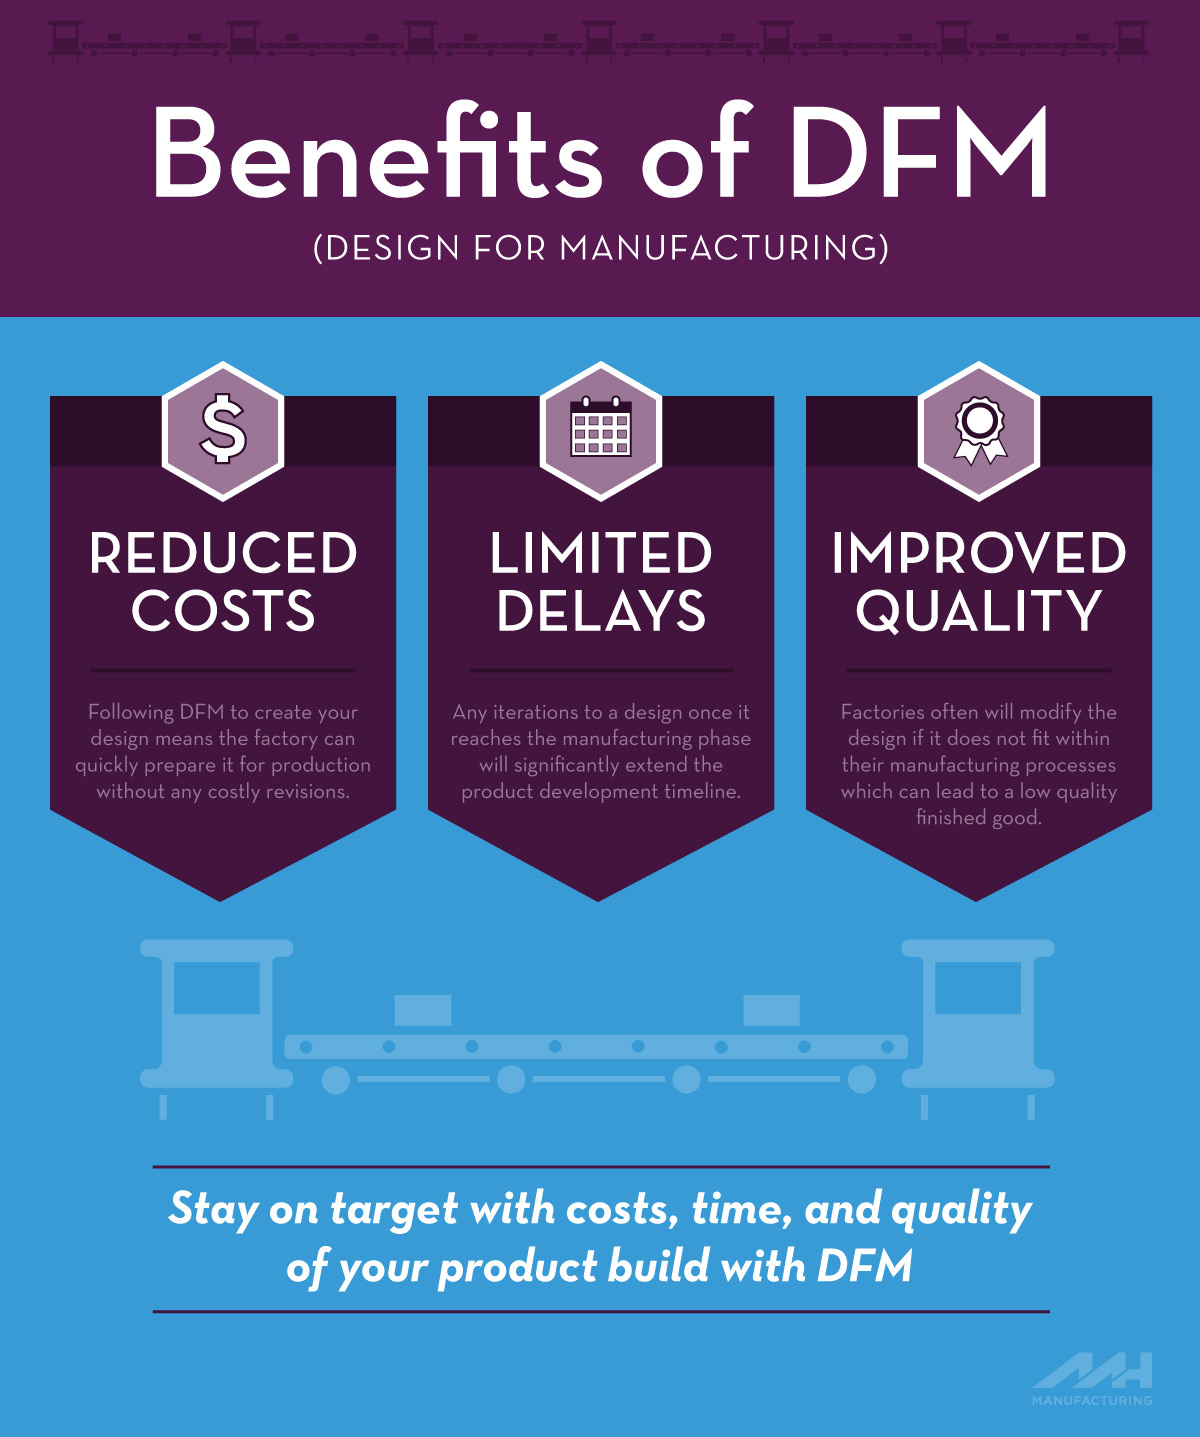 Design for Manufacturing Benefits